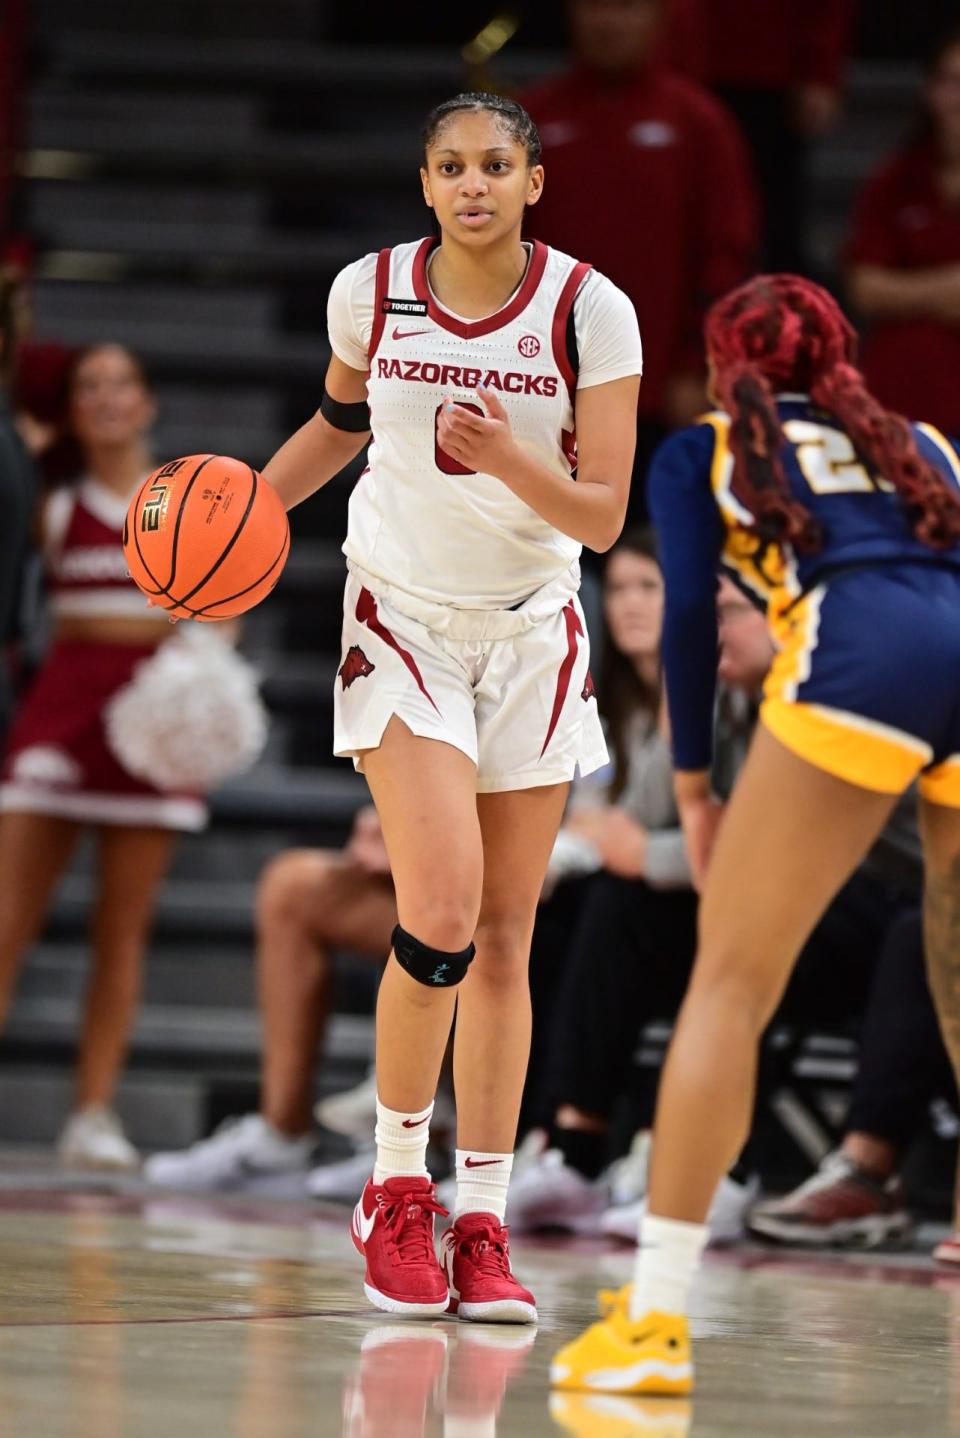 Taliah Scott brings the ball up the floor during the Arkansas women's basketball team's 82-79 win over Murray State Friday.